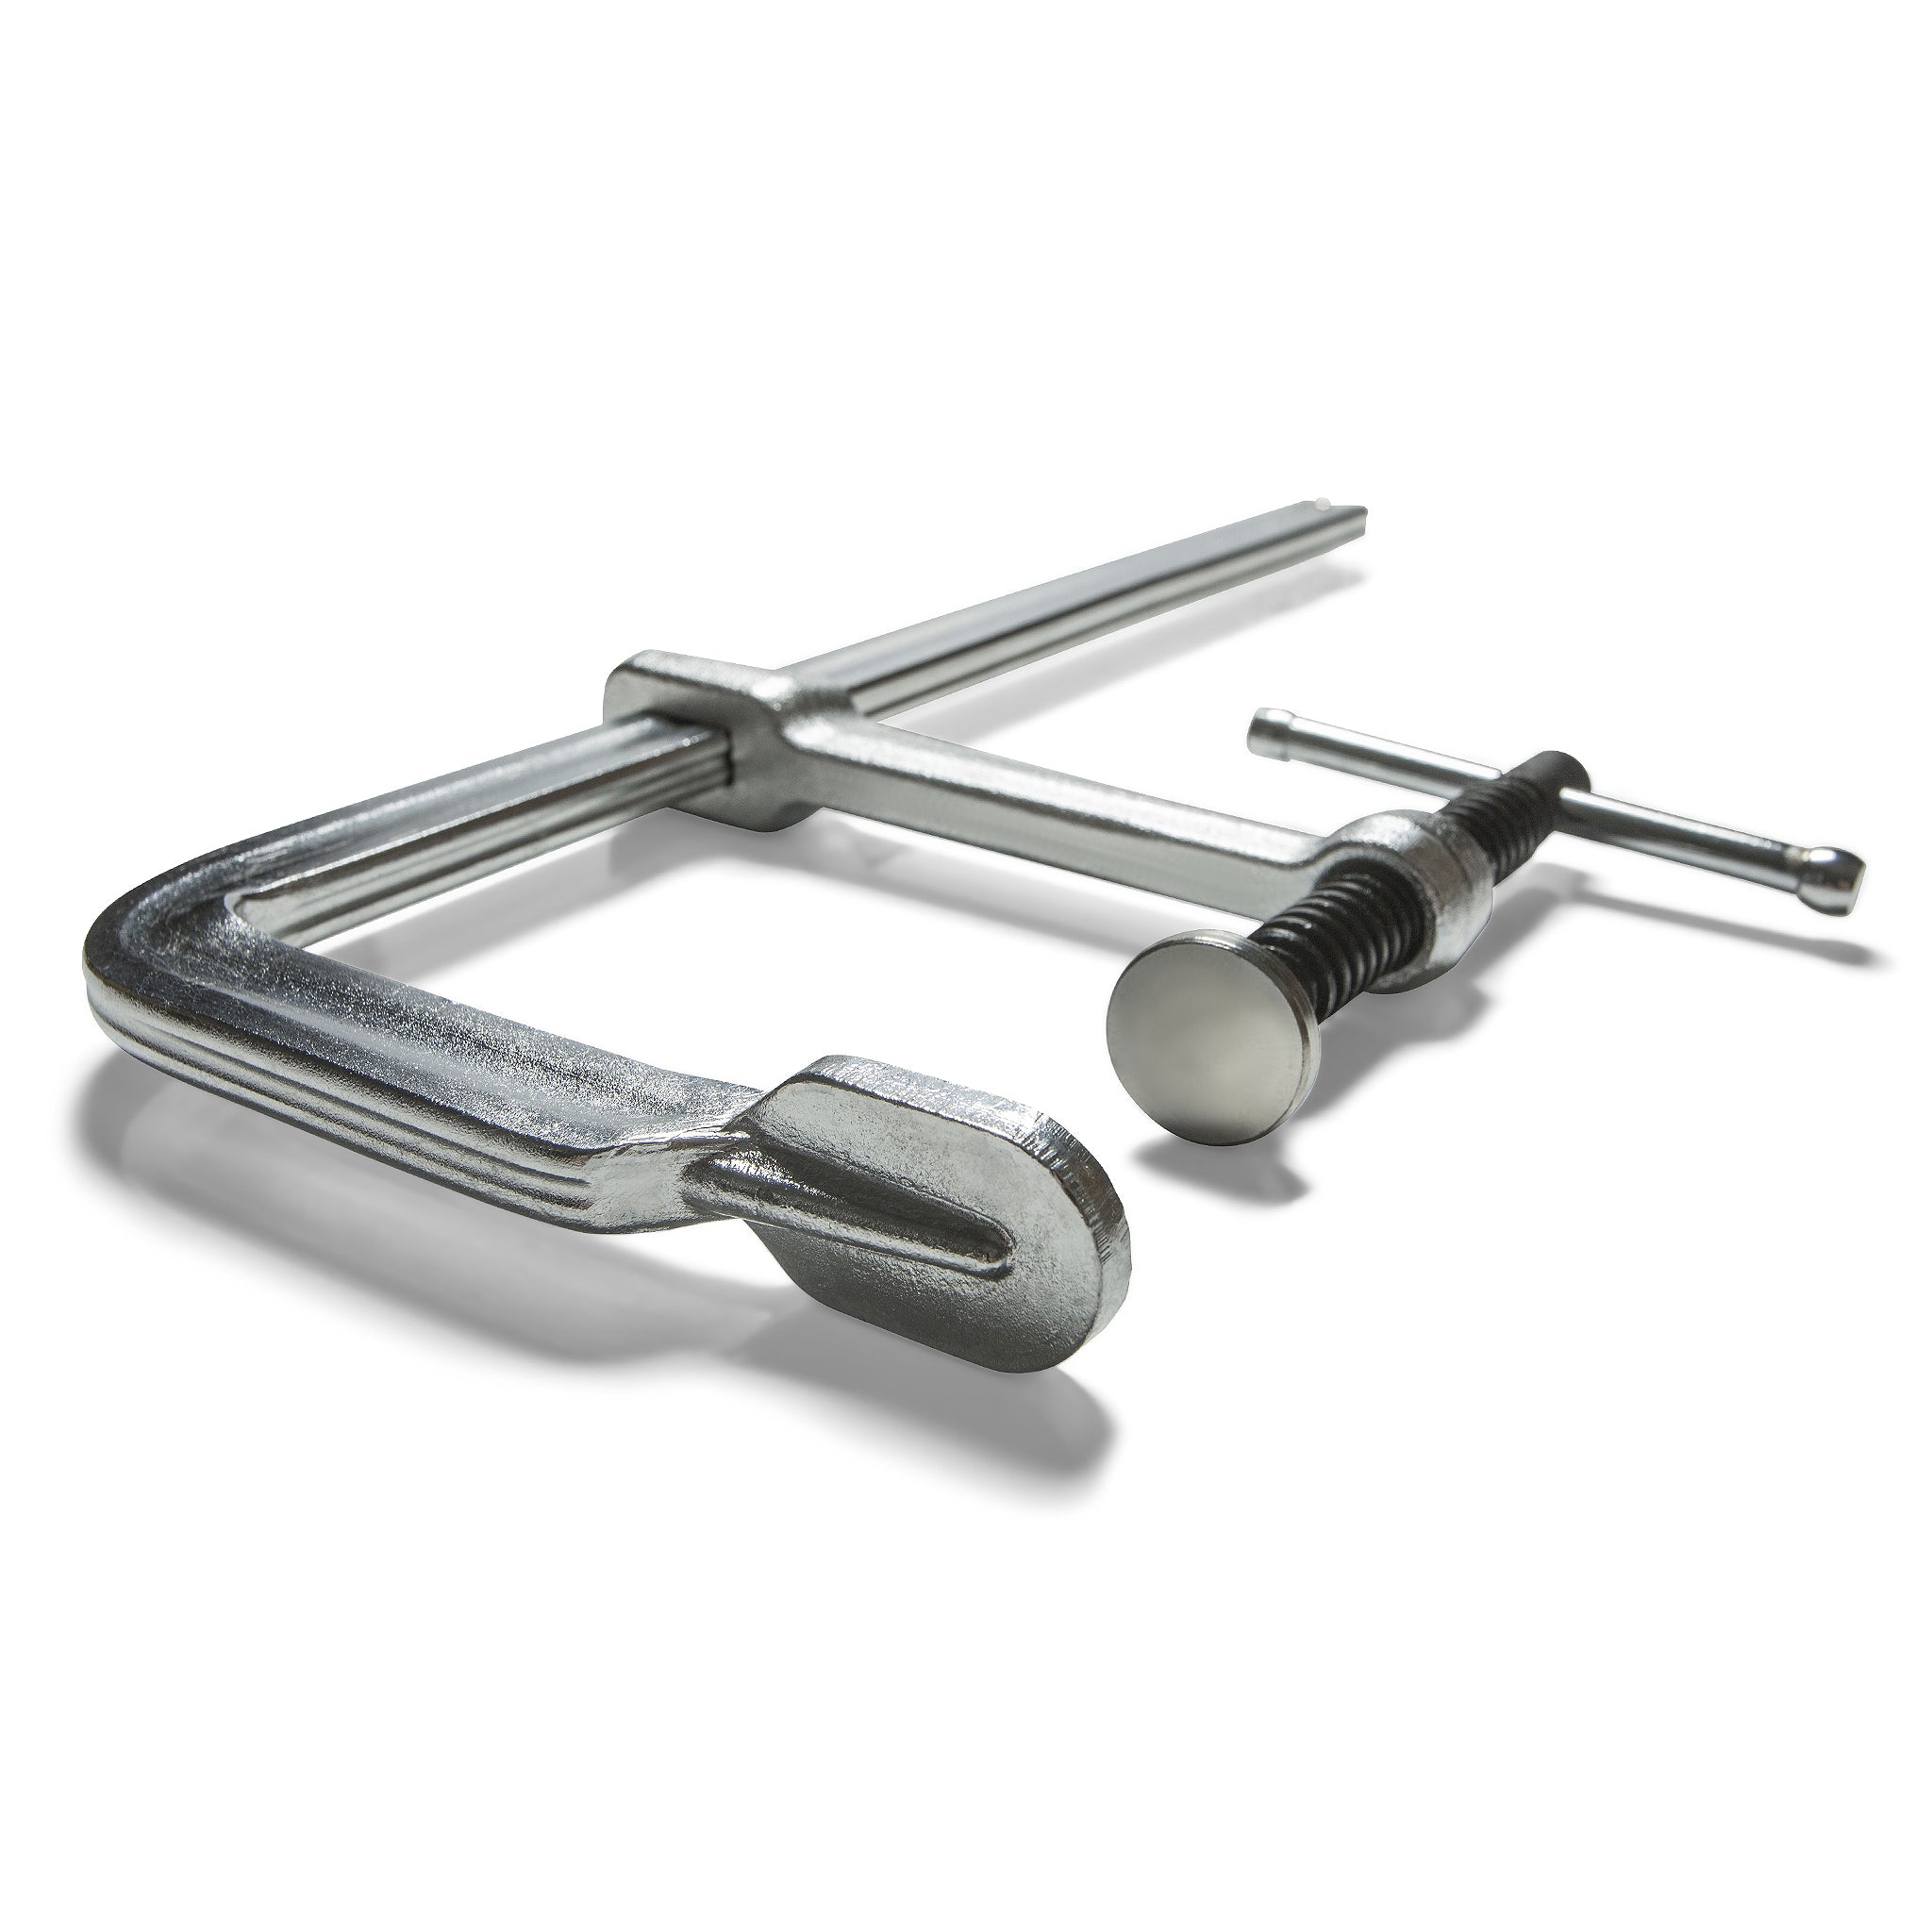 Forged F Clamps - Large  - 600mm x 120mm - Pack of 4